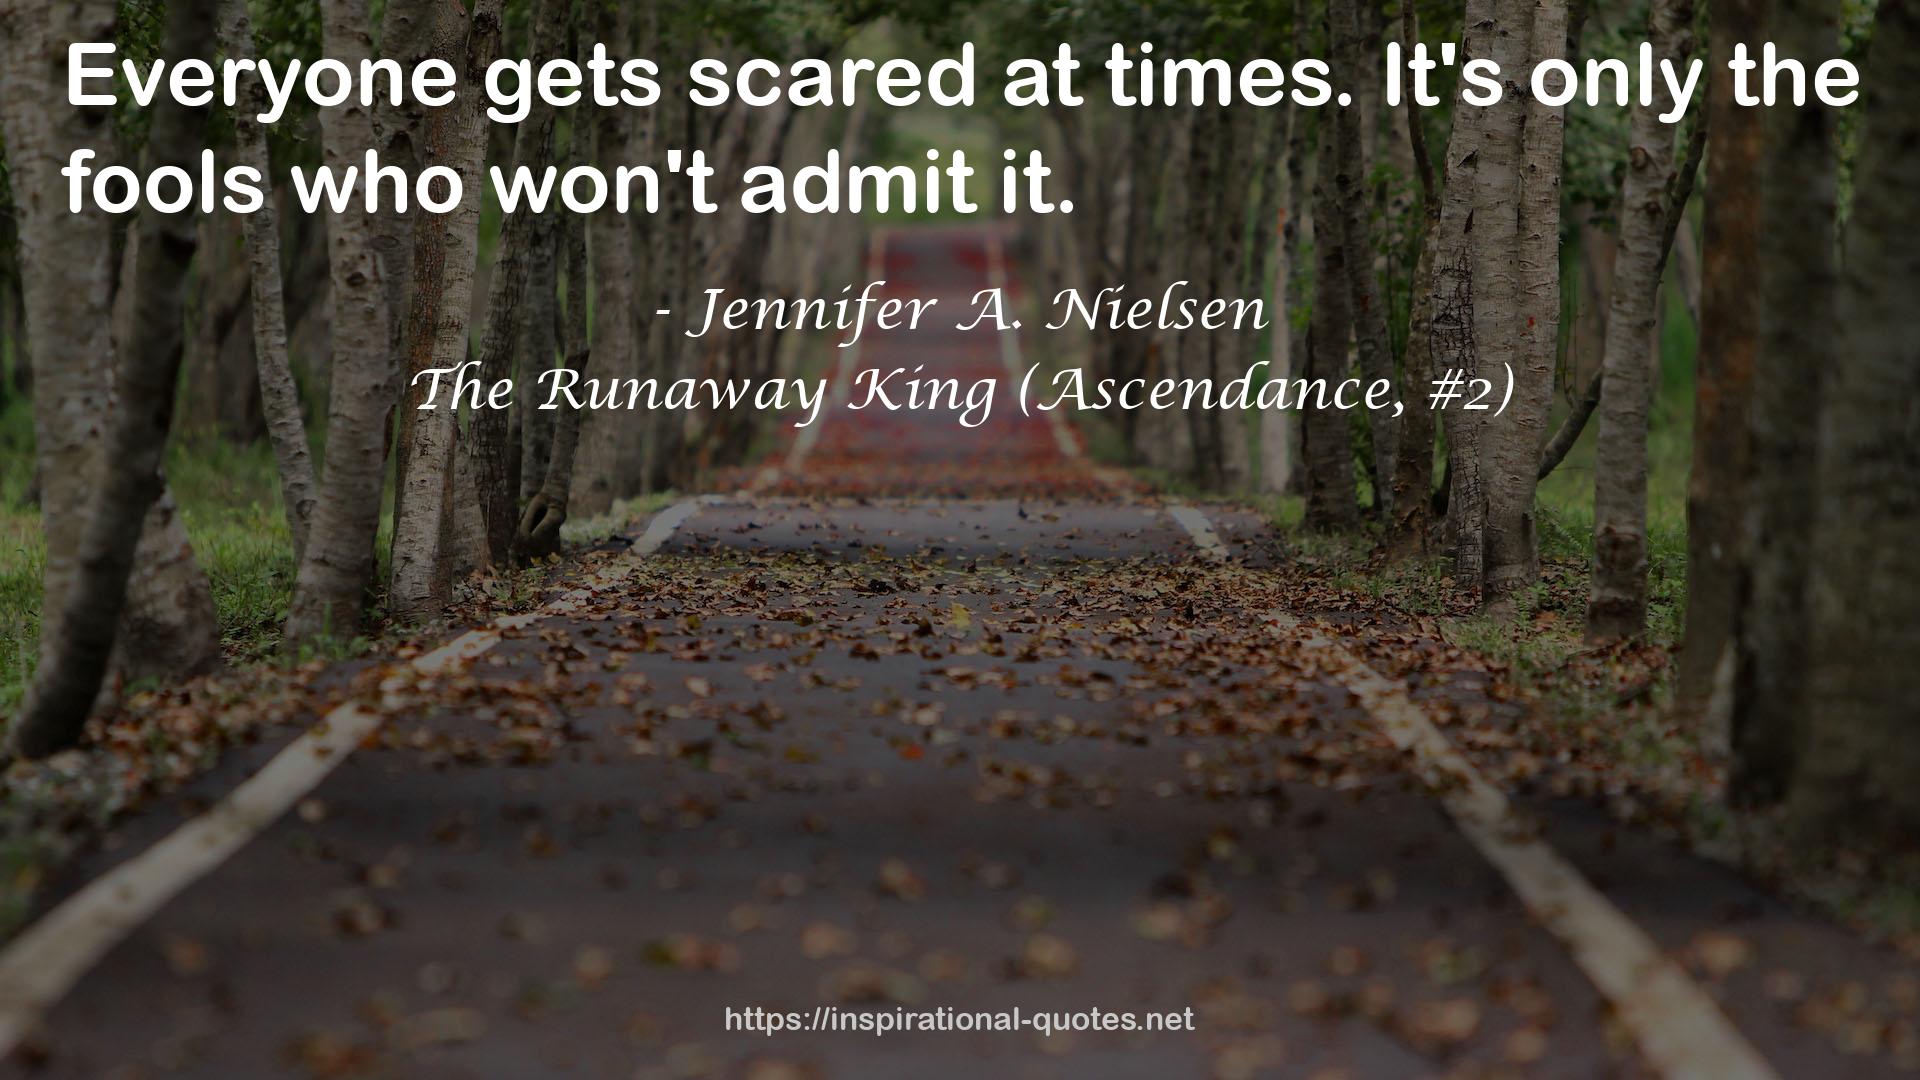 The Runaway King (Ascendance, #2) QUOTES